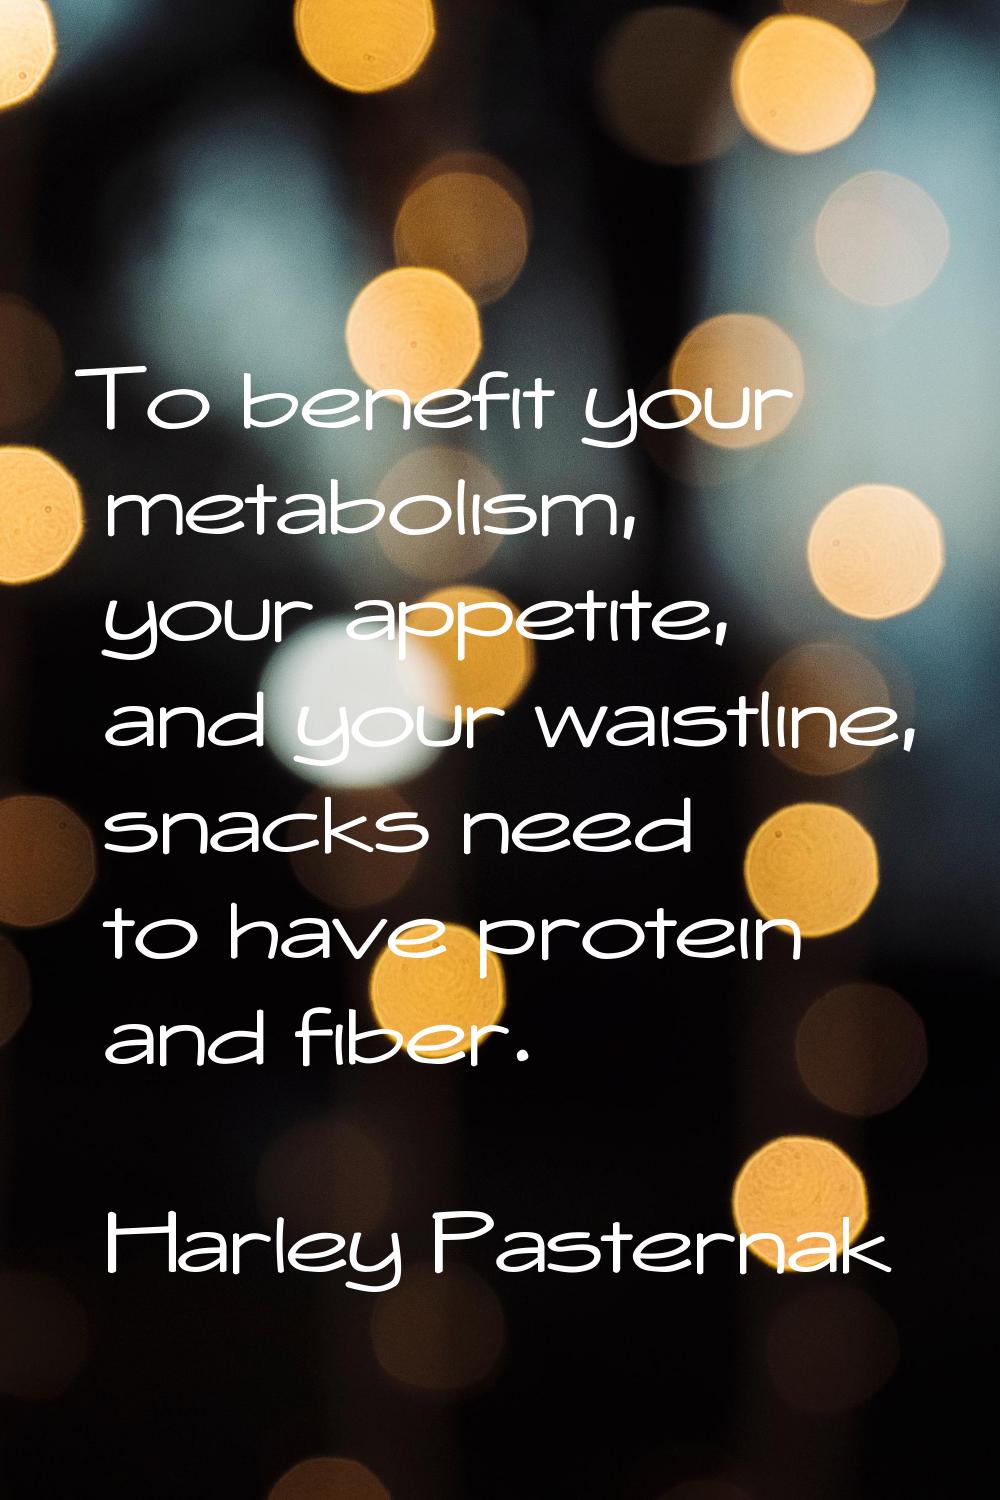 To benefit your metabolism, your appetite, and your waistline, snacks need to have protein and fibe